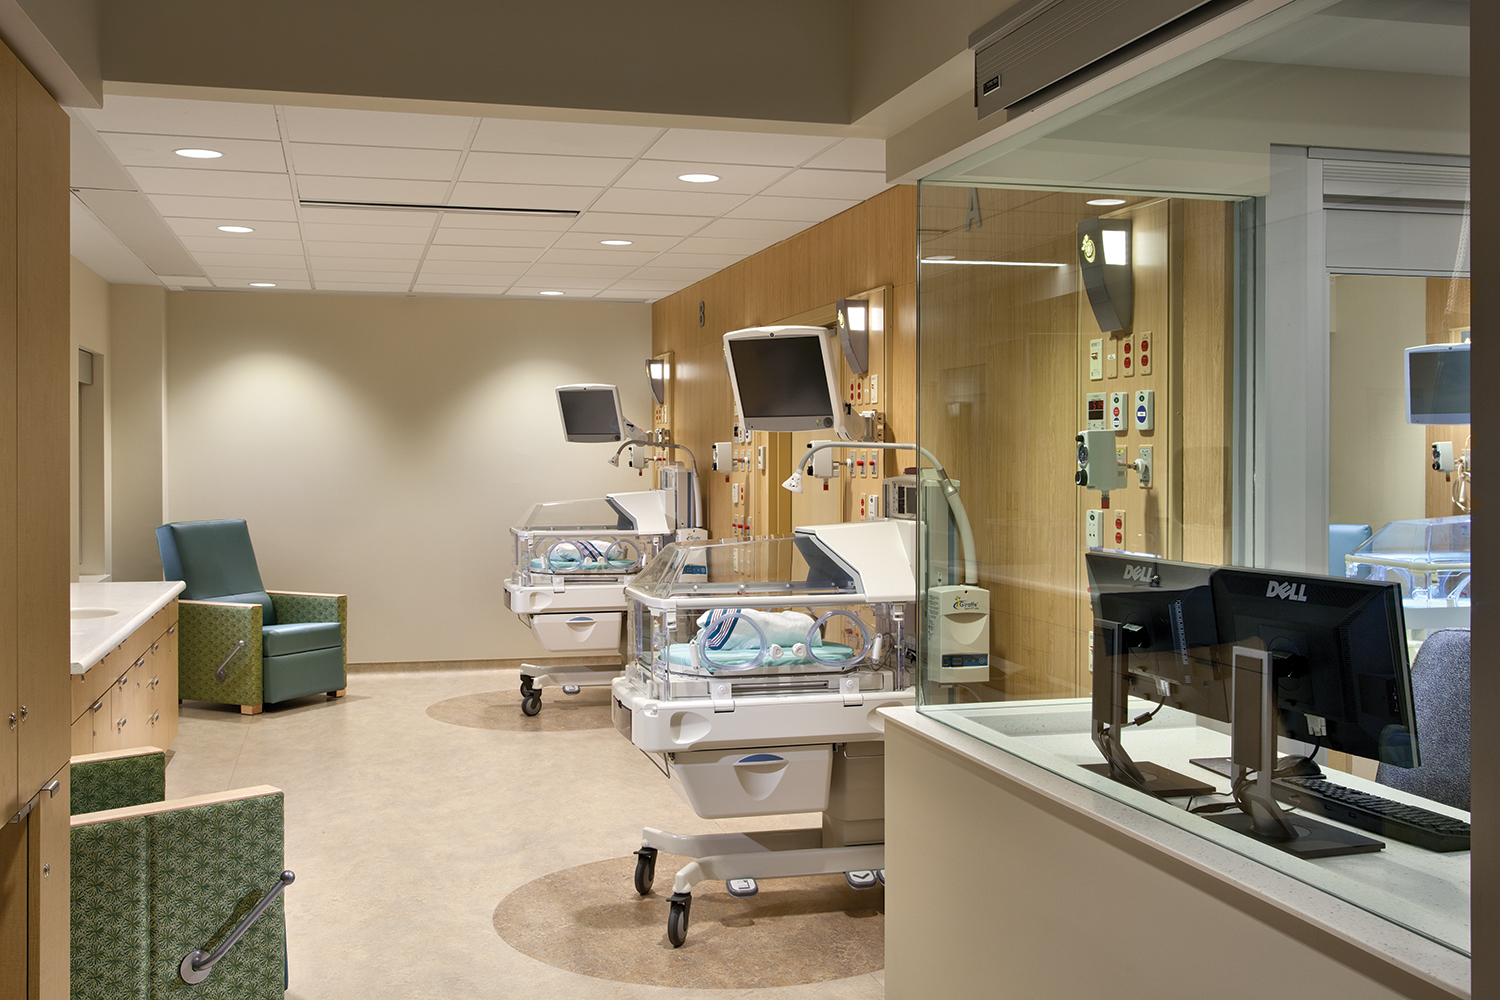 Cypress custom light fixtures in a healthcare facility, above a clean, modern NICU unit.